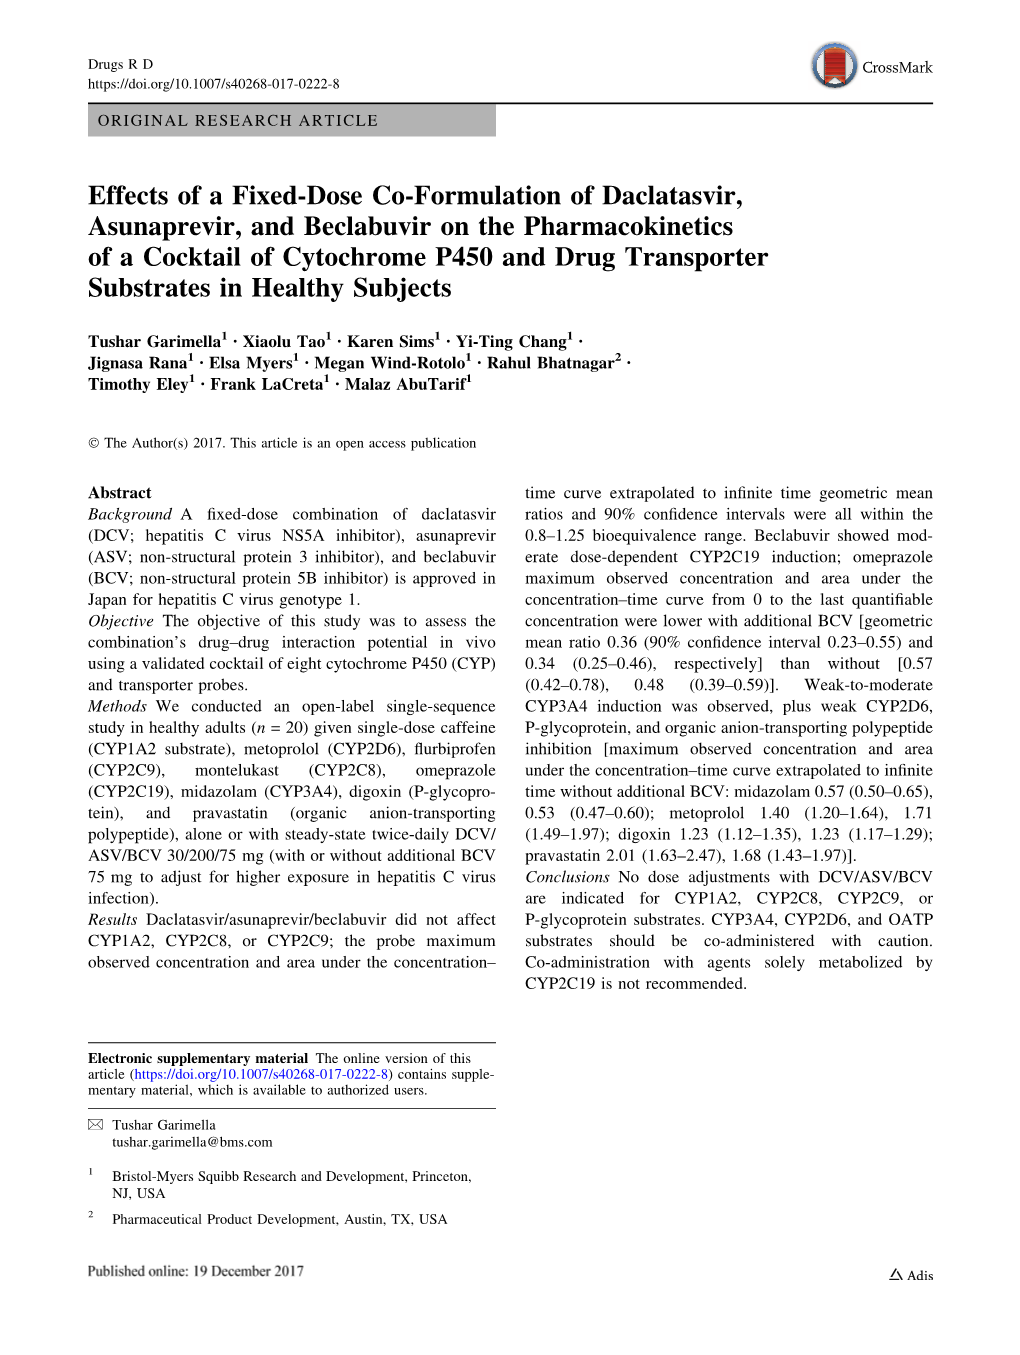 Effects of a Fixed-Dose Co-Formulation of Daclatasvir, Asunaprevir, and Beclabuvir on the Pharmacokinetics of a Cocktail of Cyto